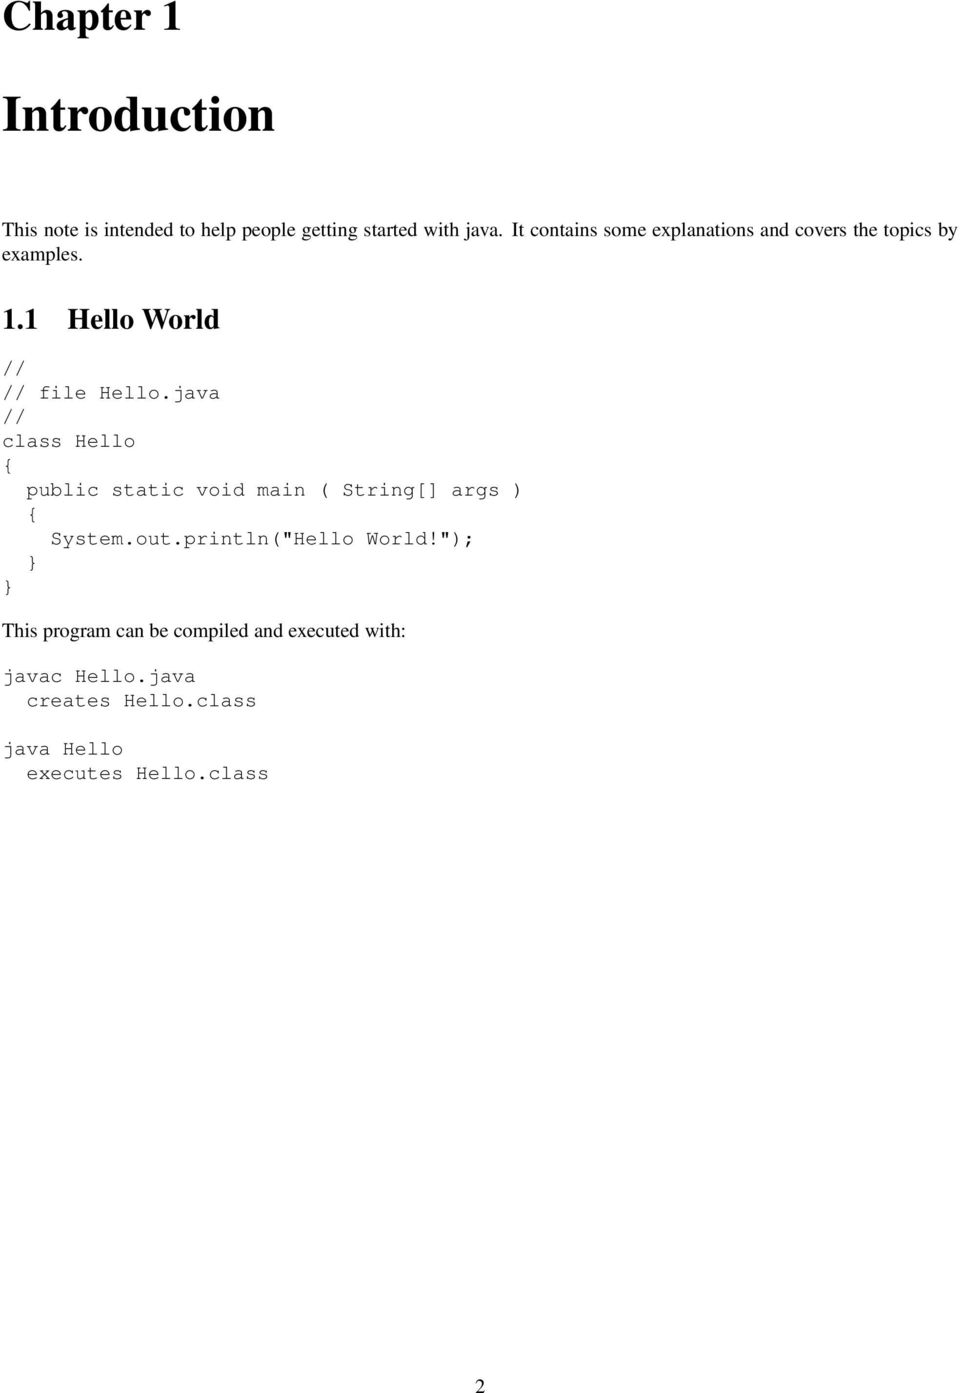 java // class Hello public static void main ( String[] args ) System.out.println("Hello World!